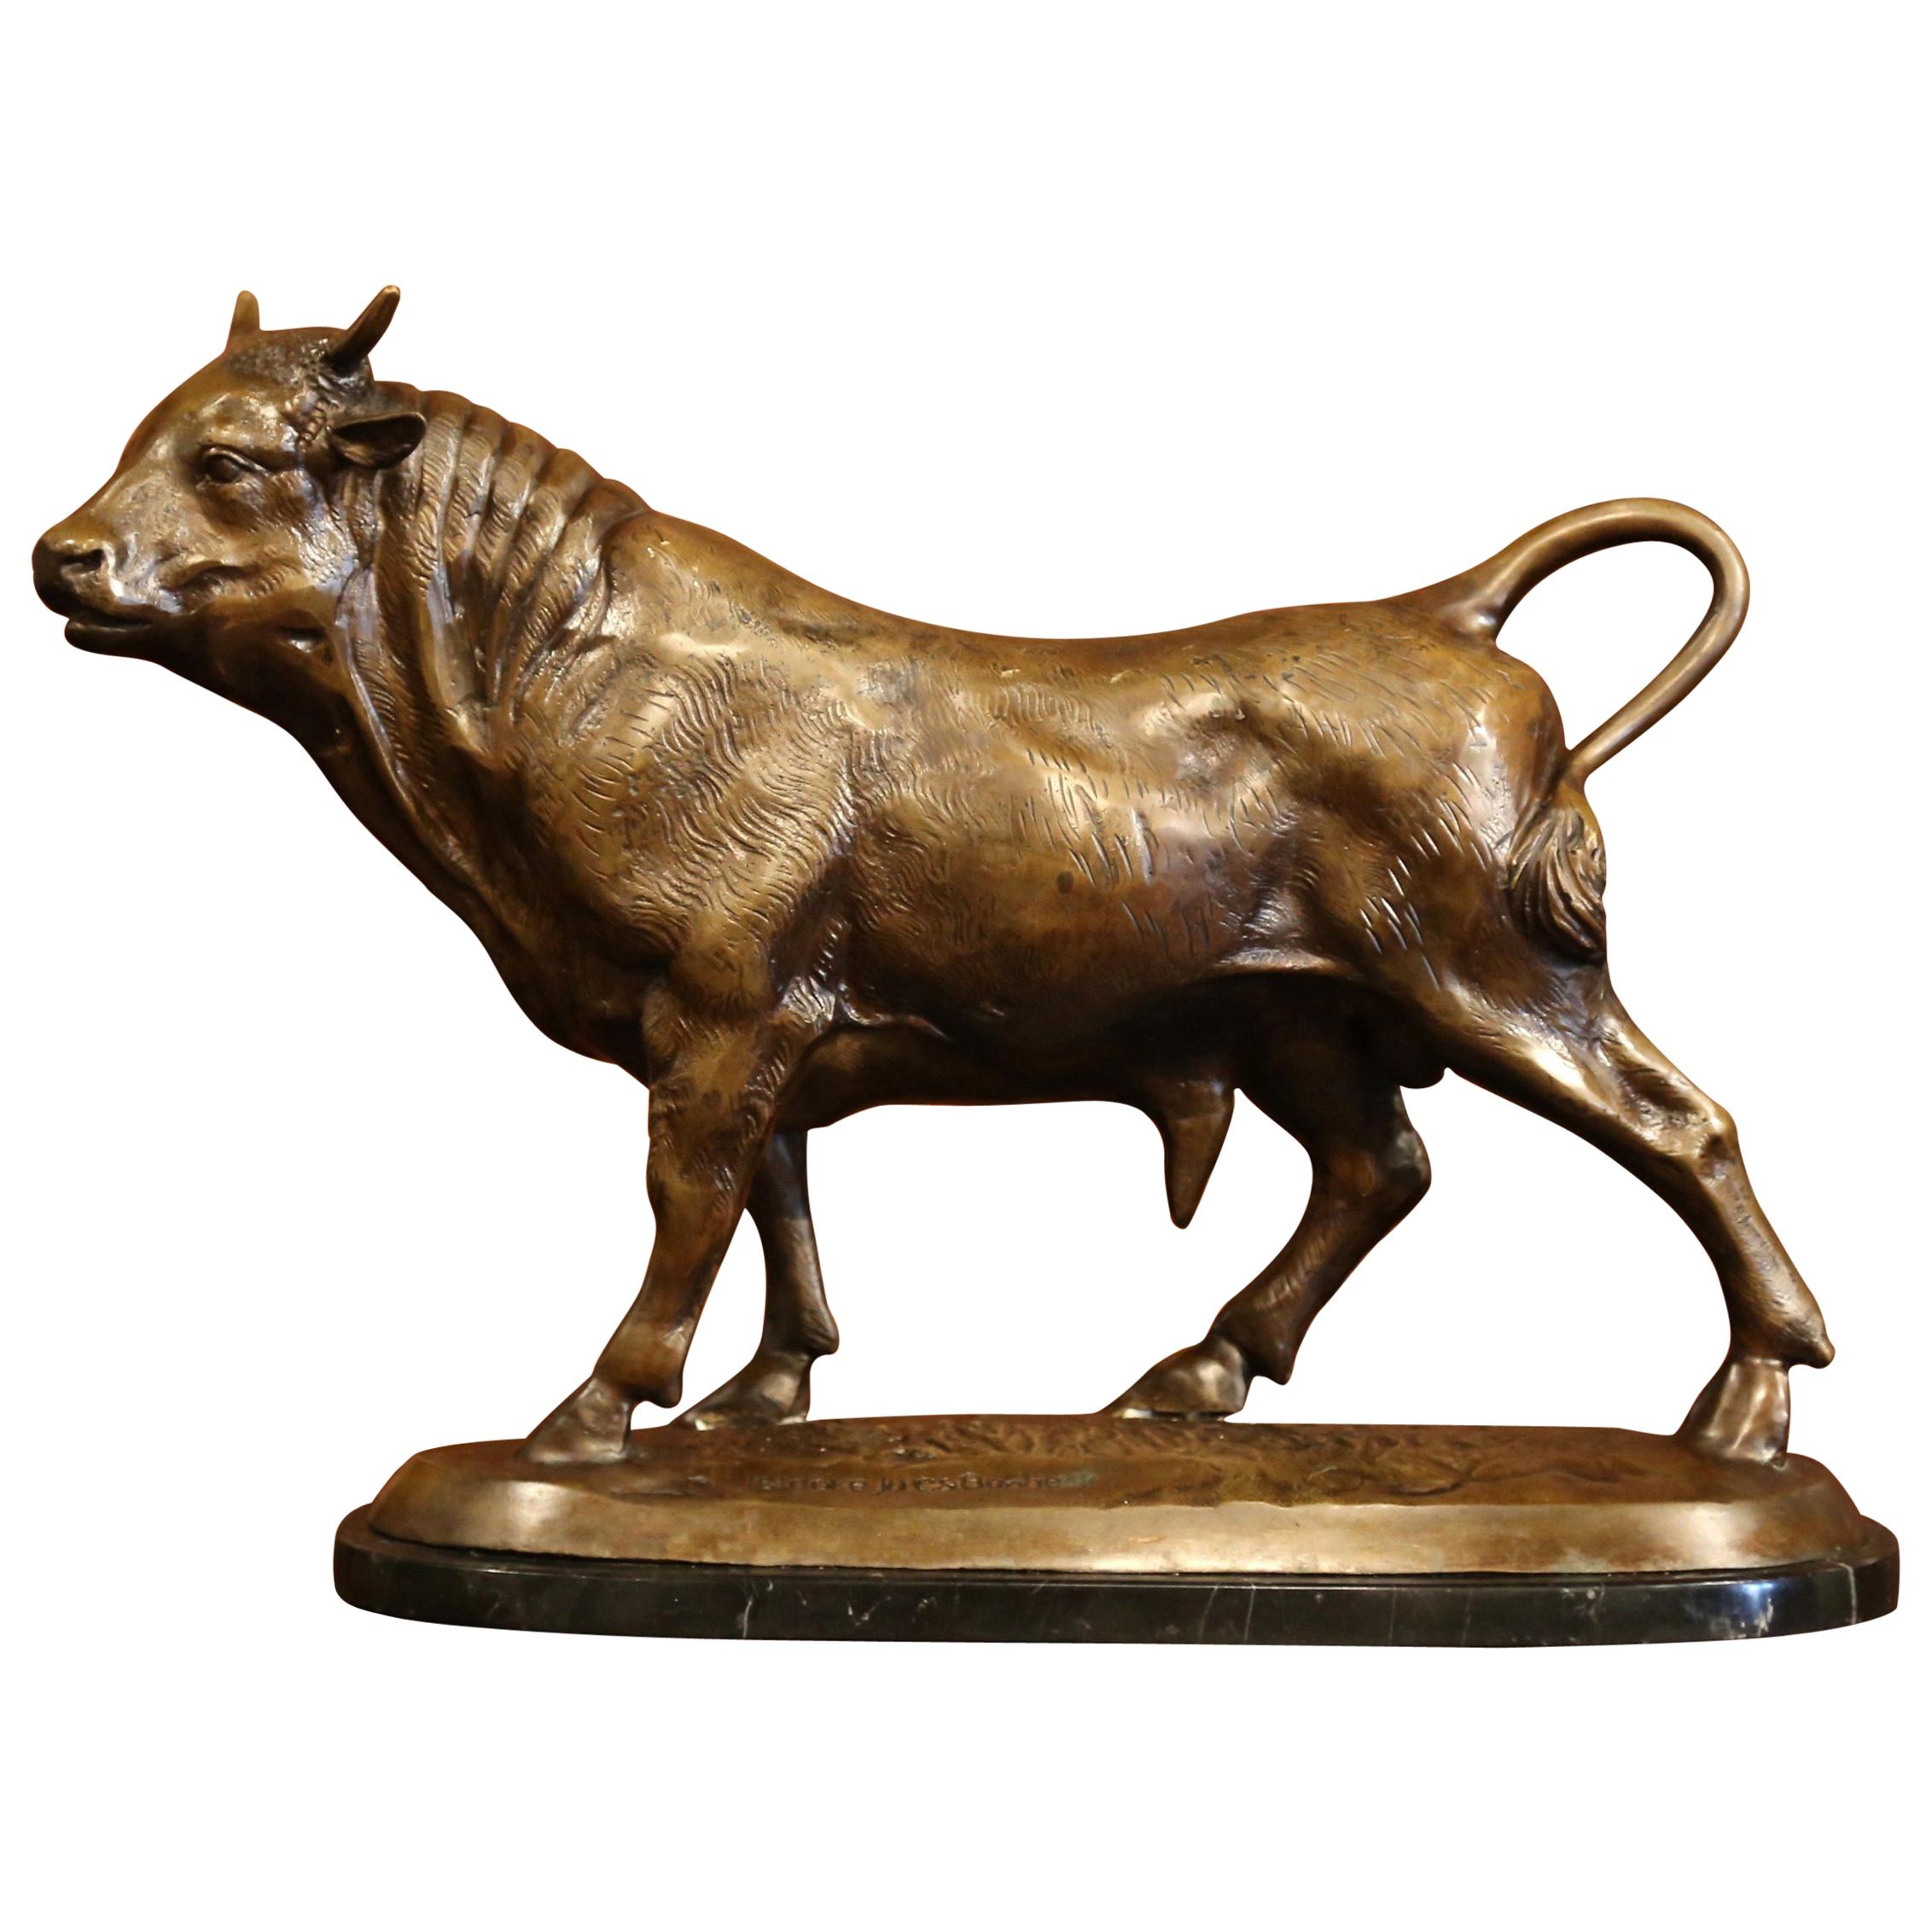 Early 20th Century French Bronze Bull Sculpture on Marble Signed Isidore Bonheur